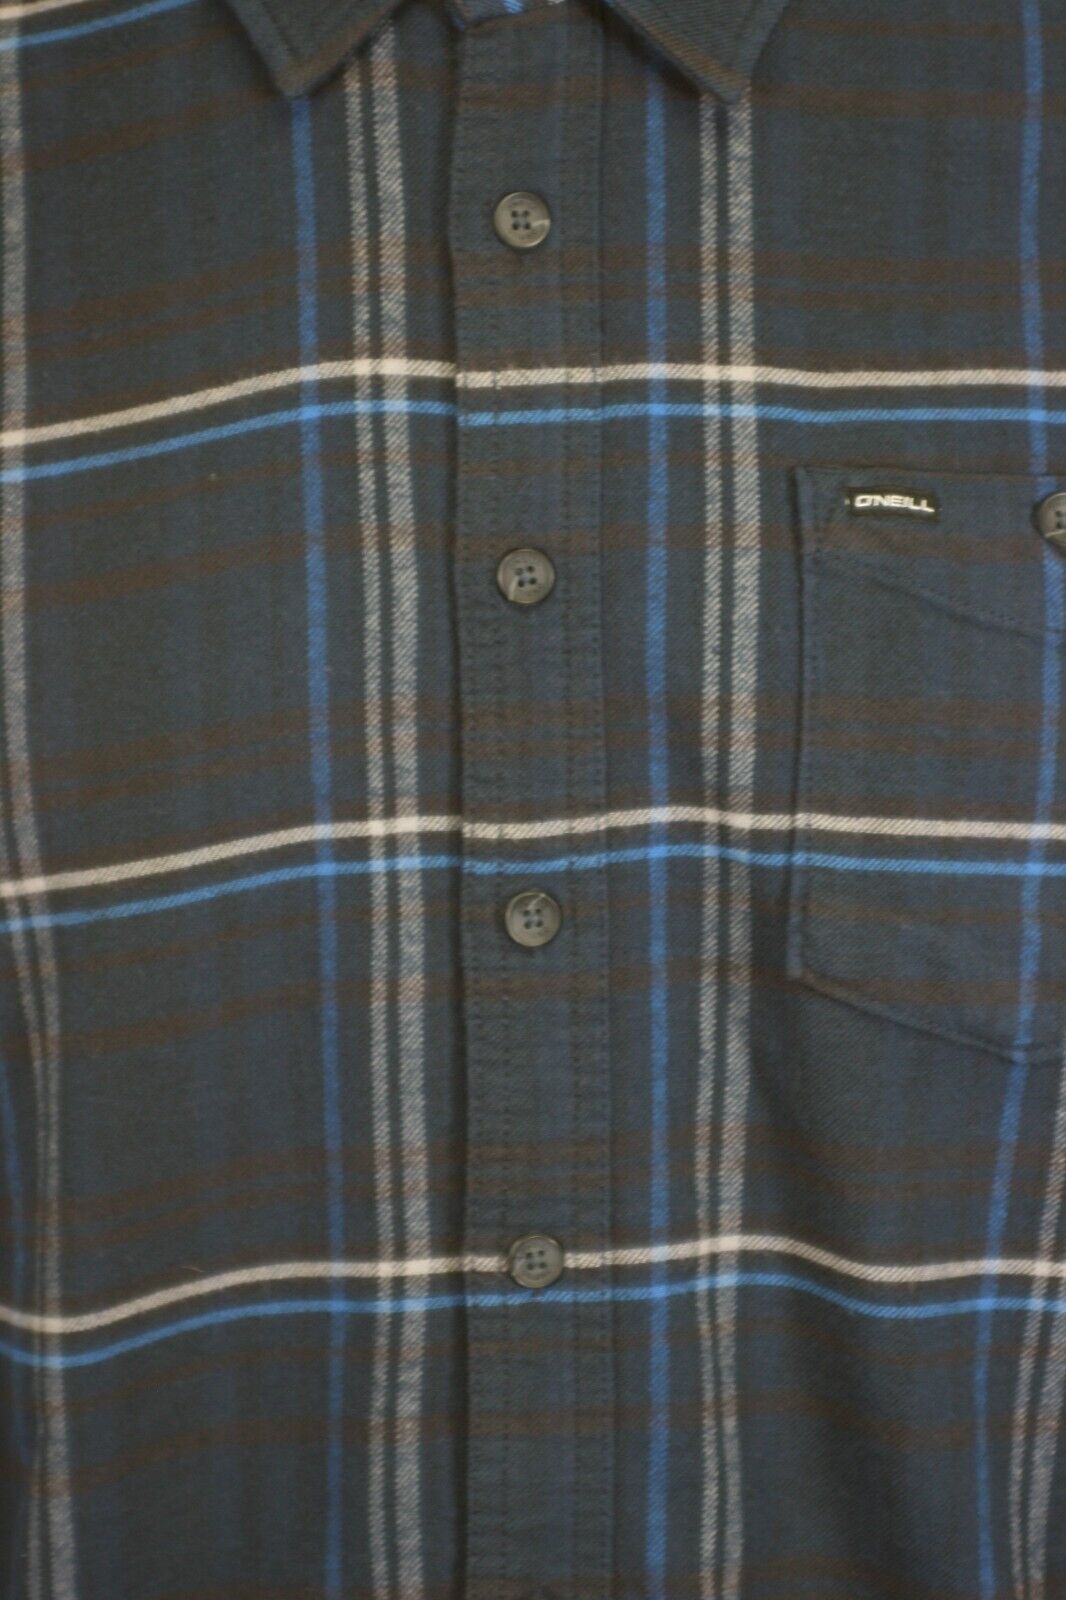 O'Neill Men's Navy Shirt Redmond Plaid Stretch Flannel White Lined L/S (S23)